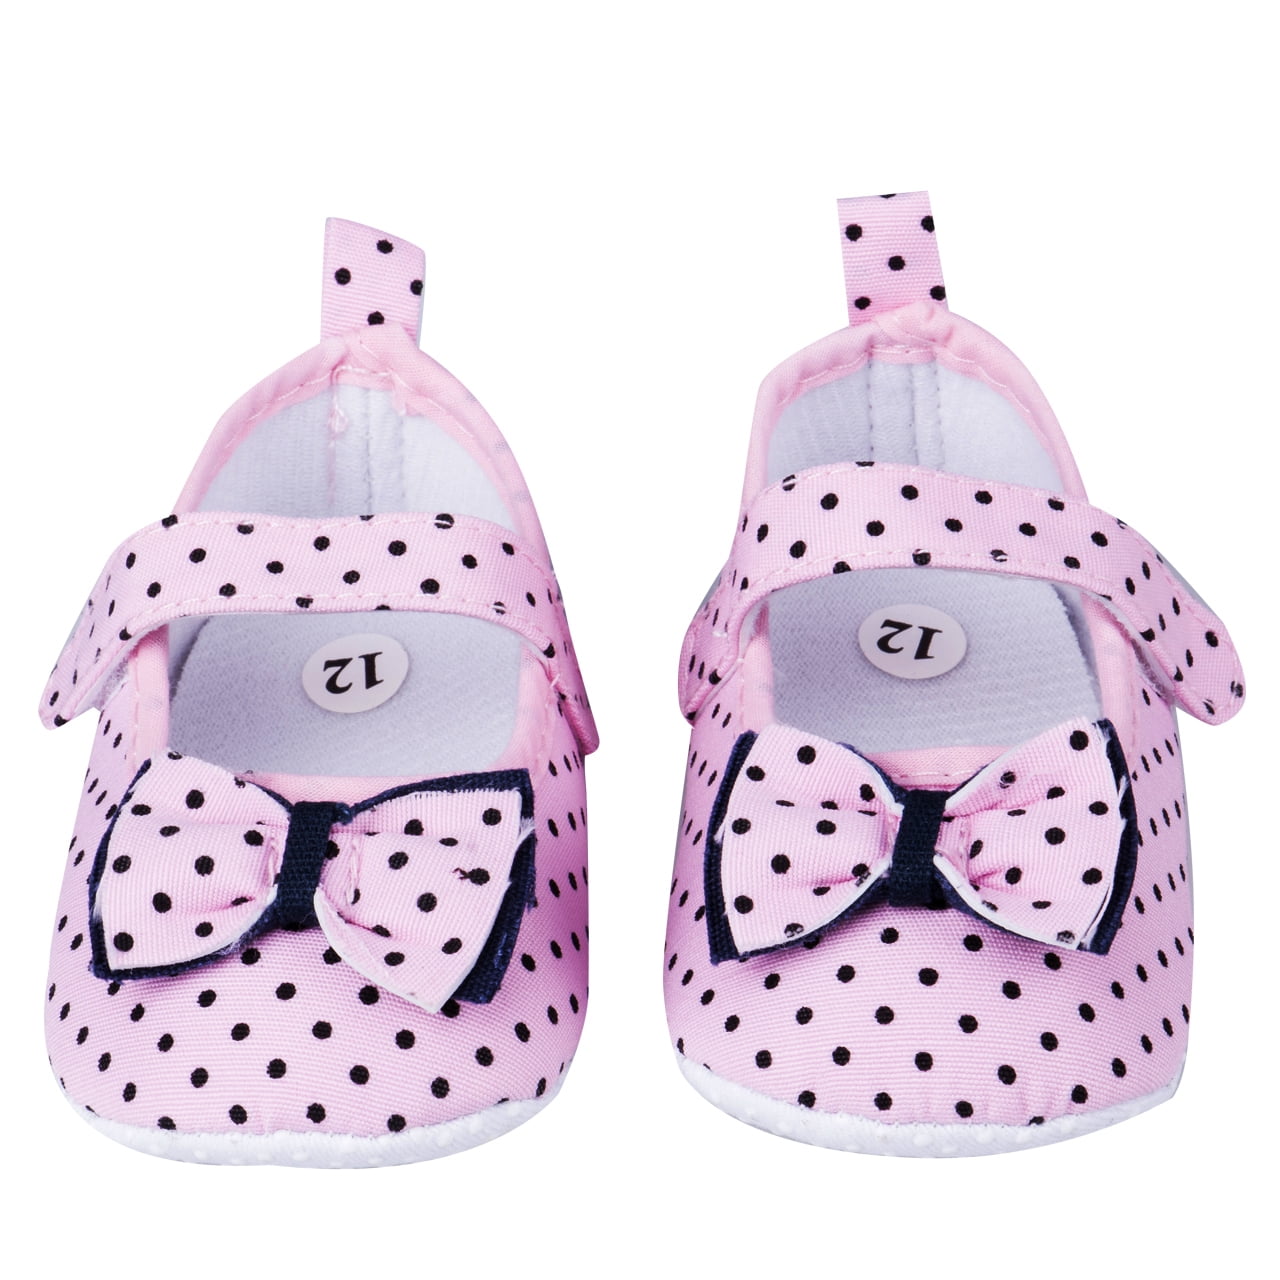 So Lovely Newborn Baby Girl Pram Shoes Princess First Shoes Size 0-6 6-12 12-18M